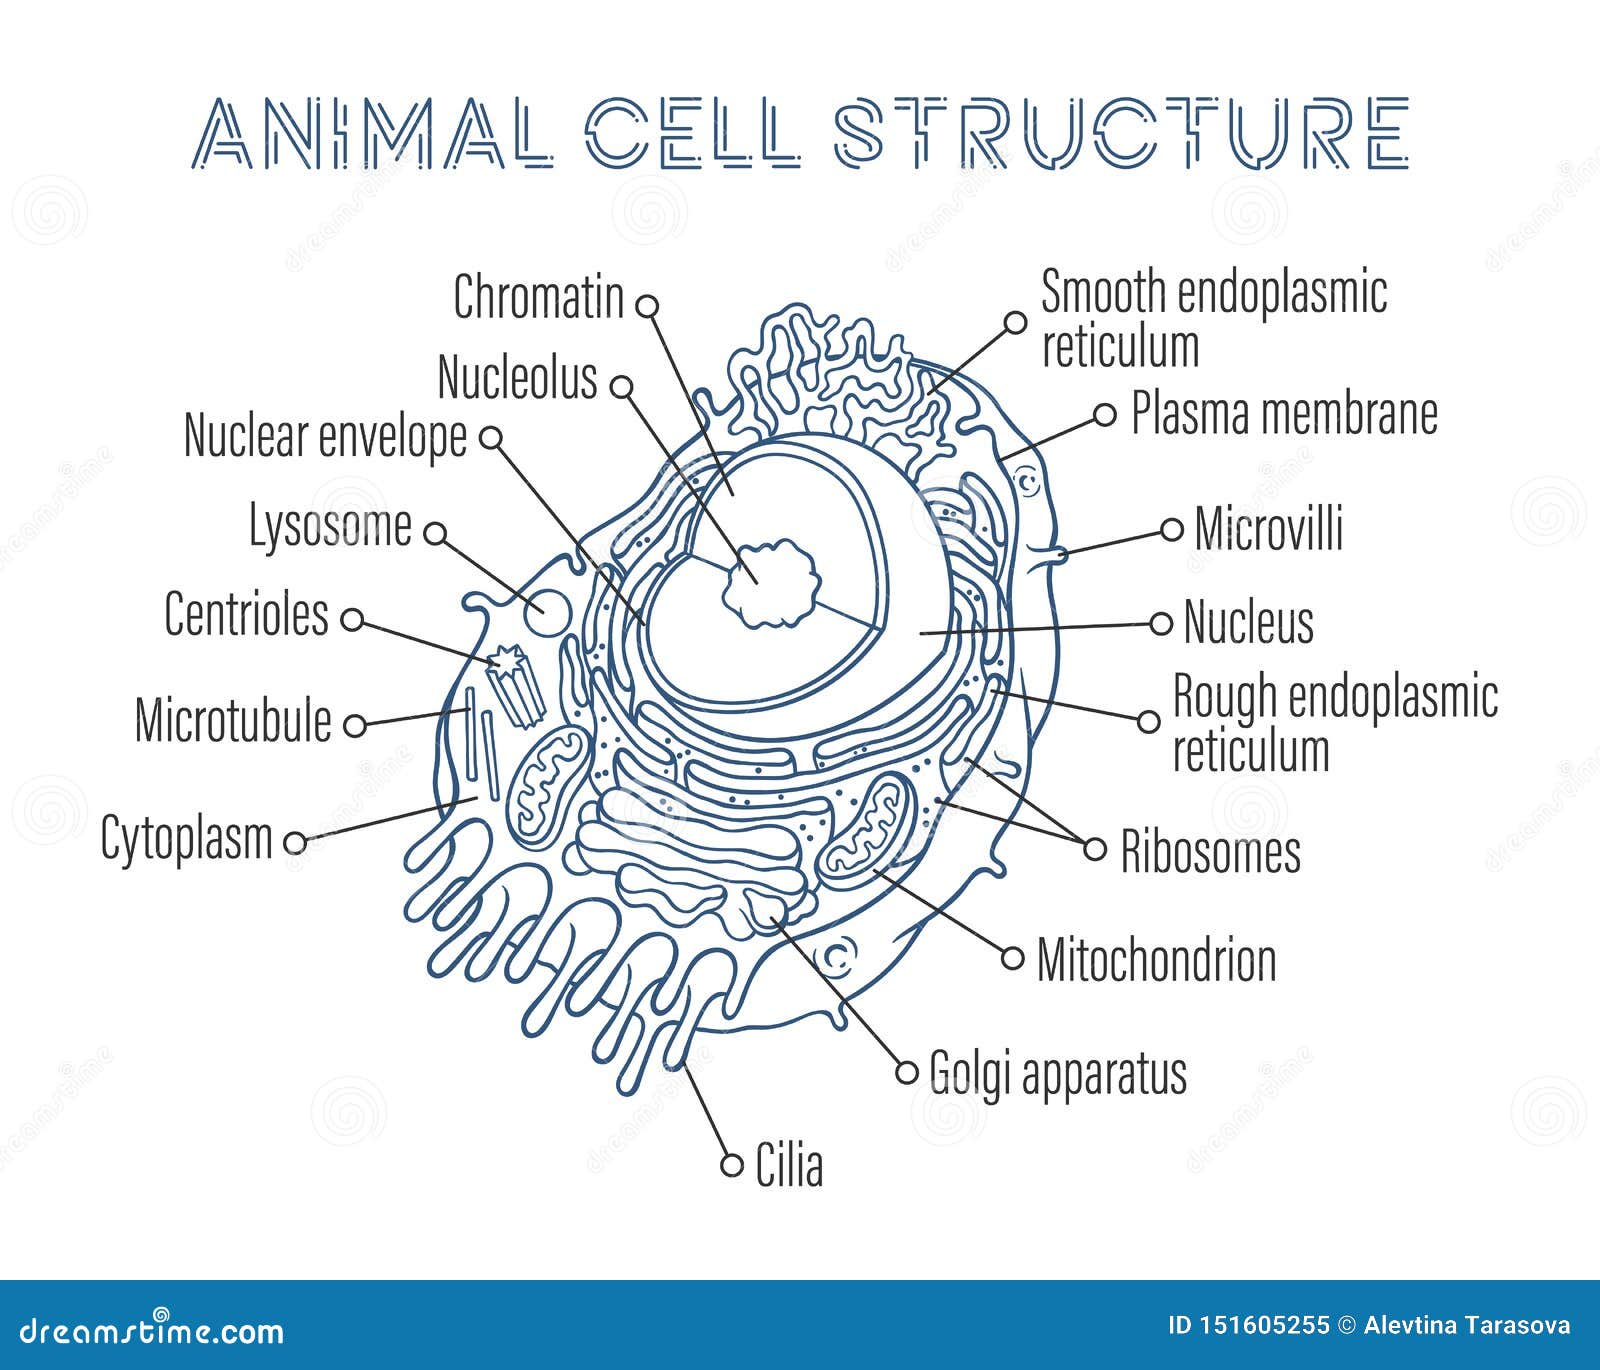 Drawing Of Animal Cell Falsely Shared As Most Detailed Image Of Human Cell  | BOOM